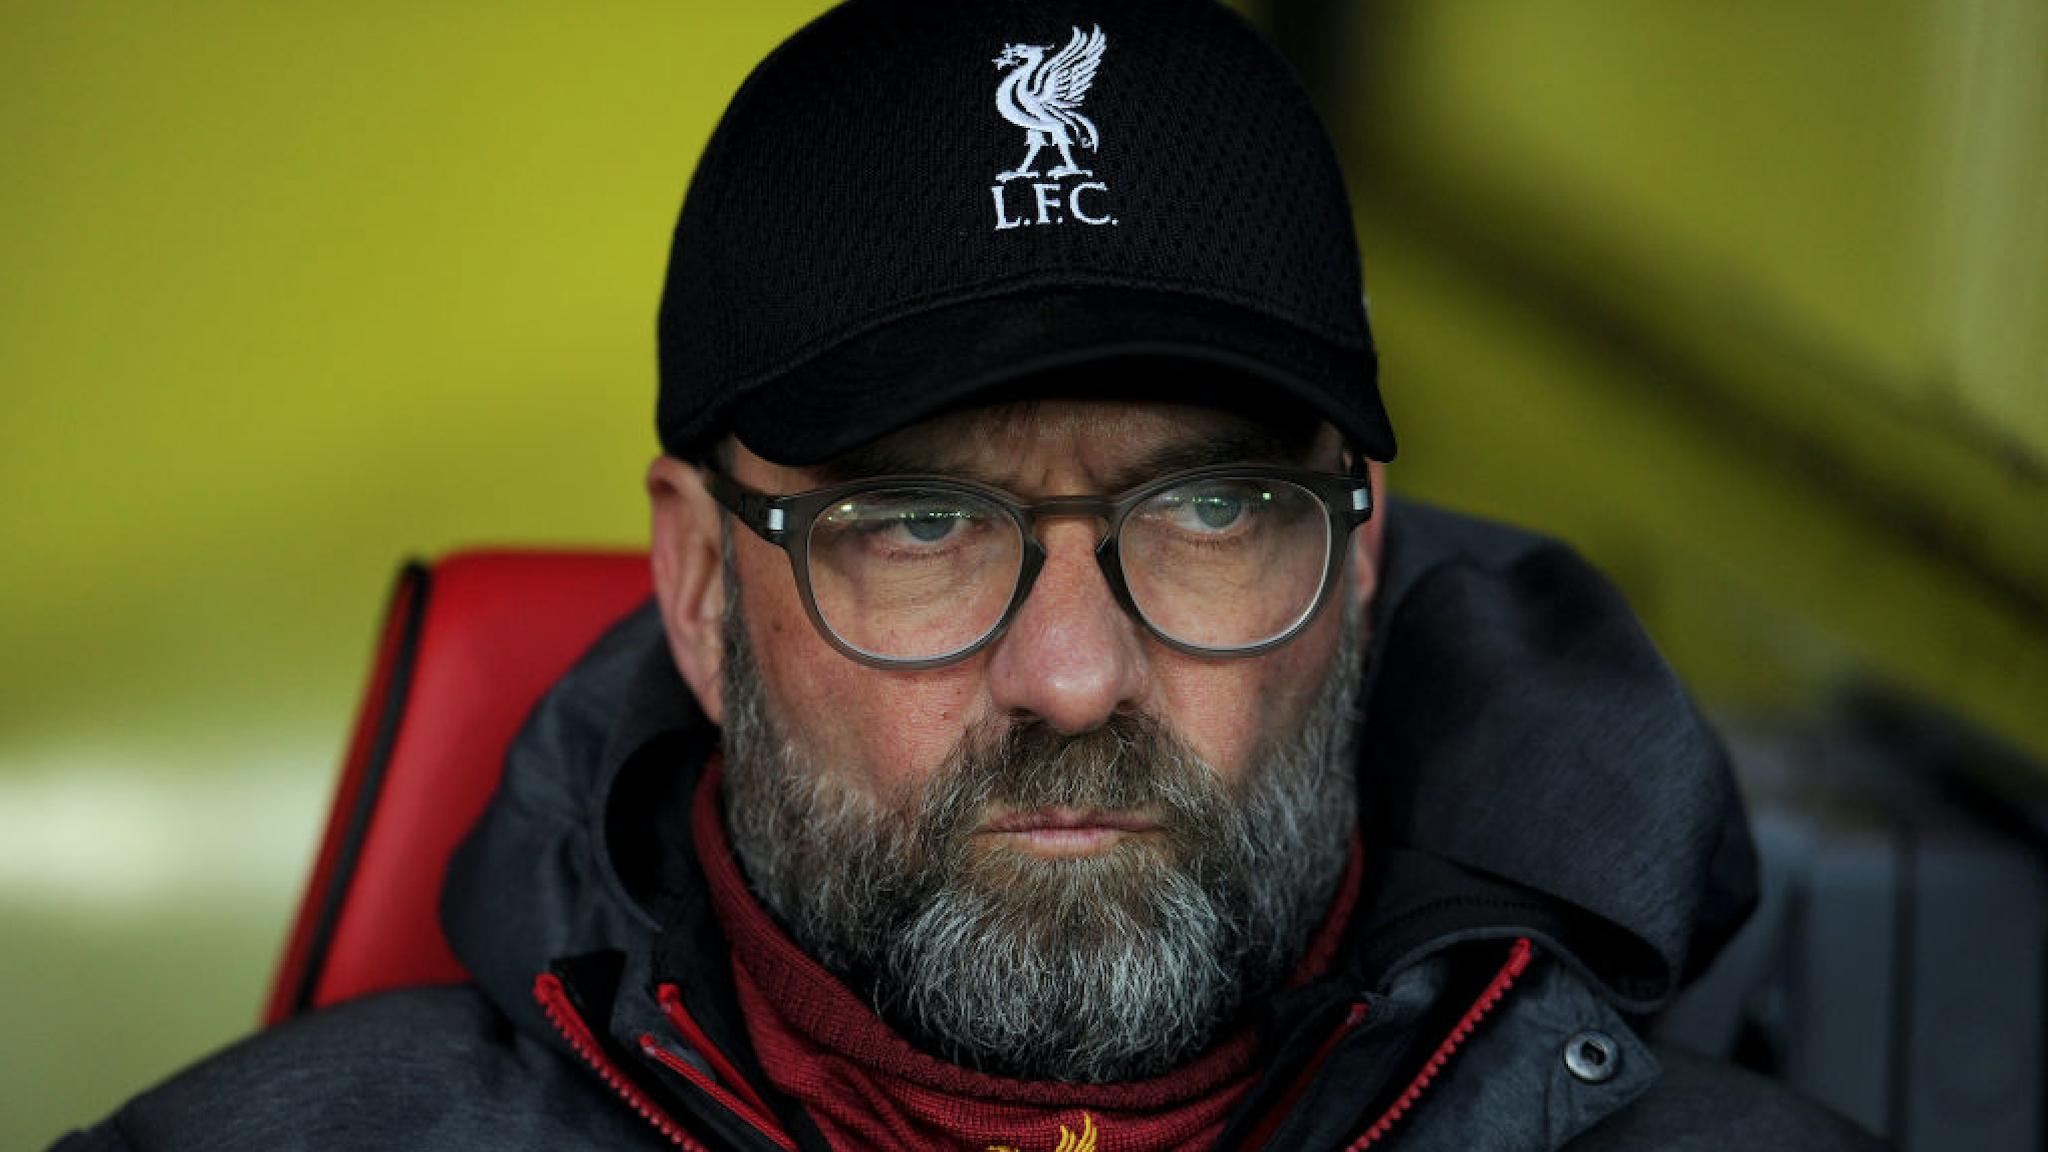 Jurgen Klopp manager of Liverpool during the Premier League match between Watford FC and Liverpool FC at Vicarage Road on February 29, 2020 in Watford, United Kingdom.